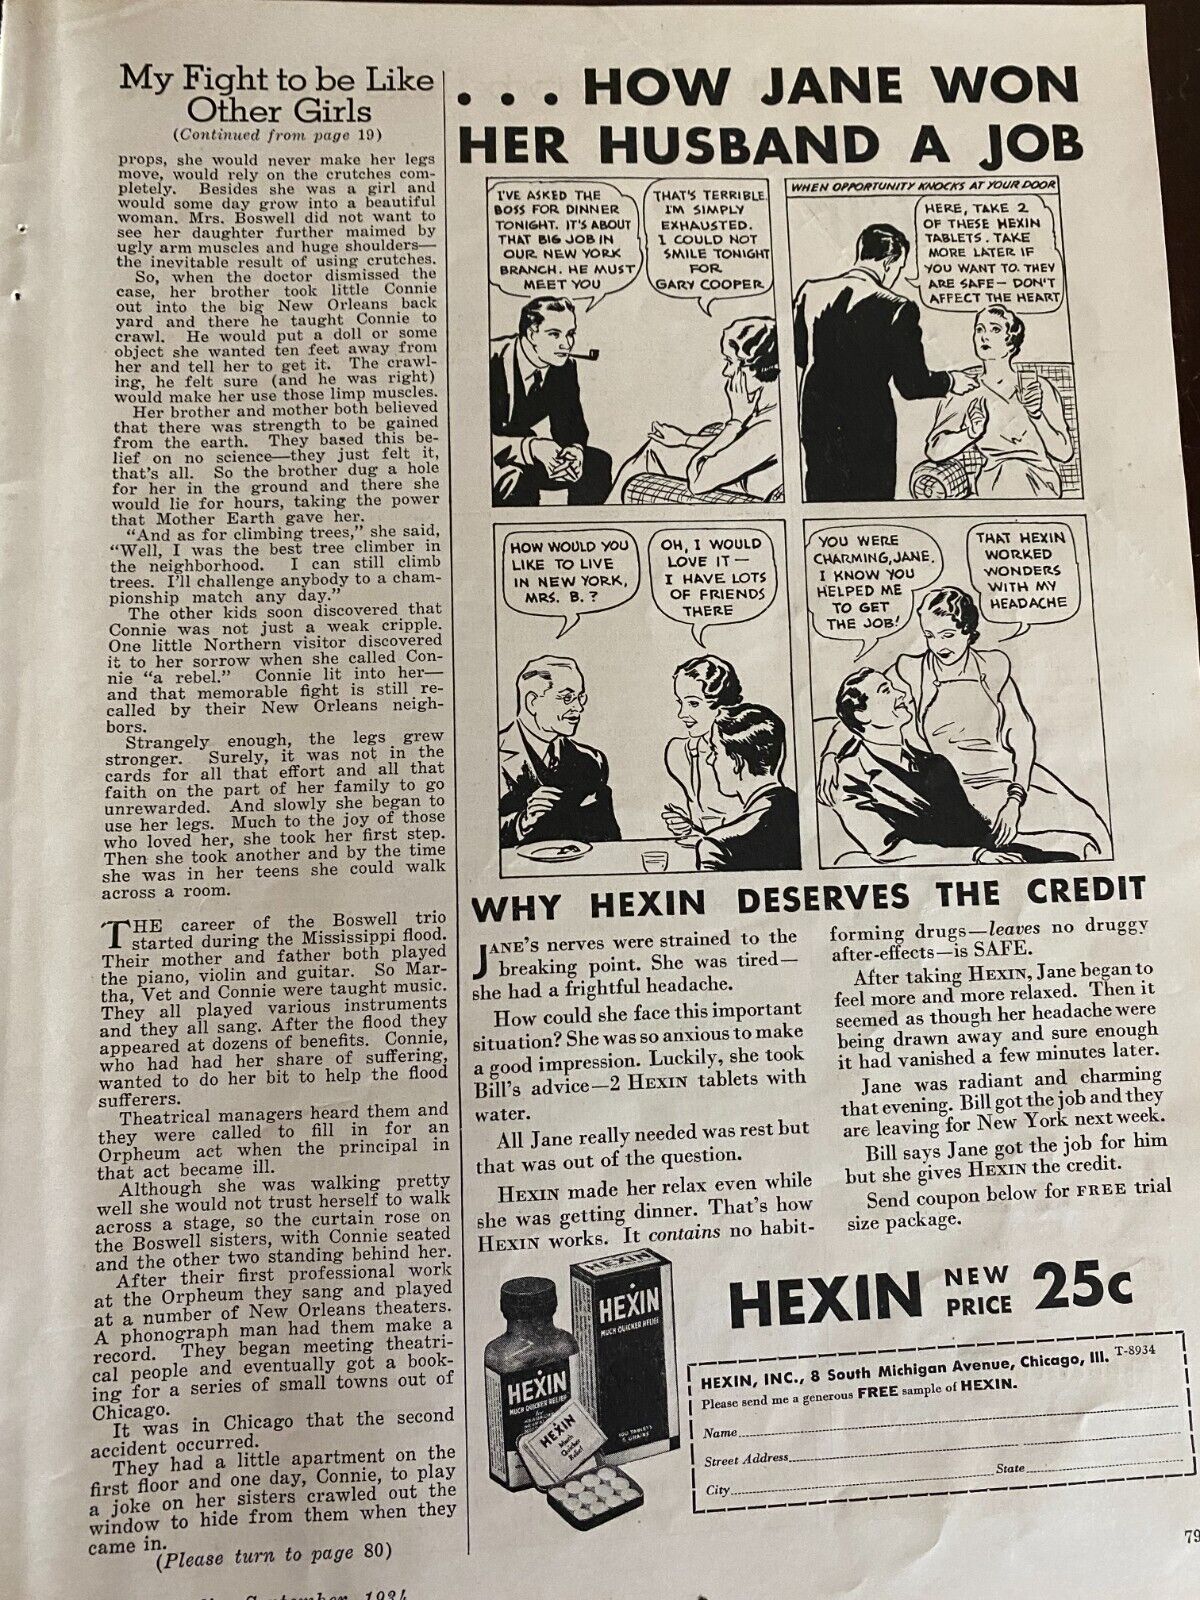 Hexin, Vintage Print Ad, a